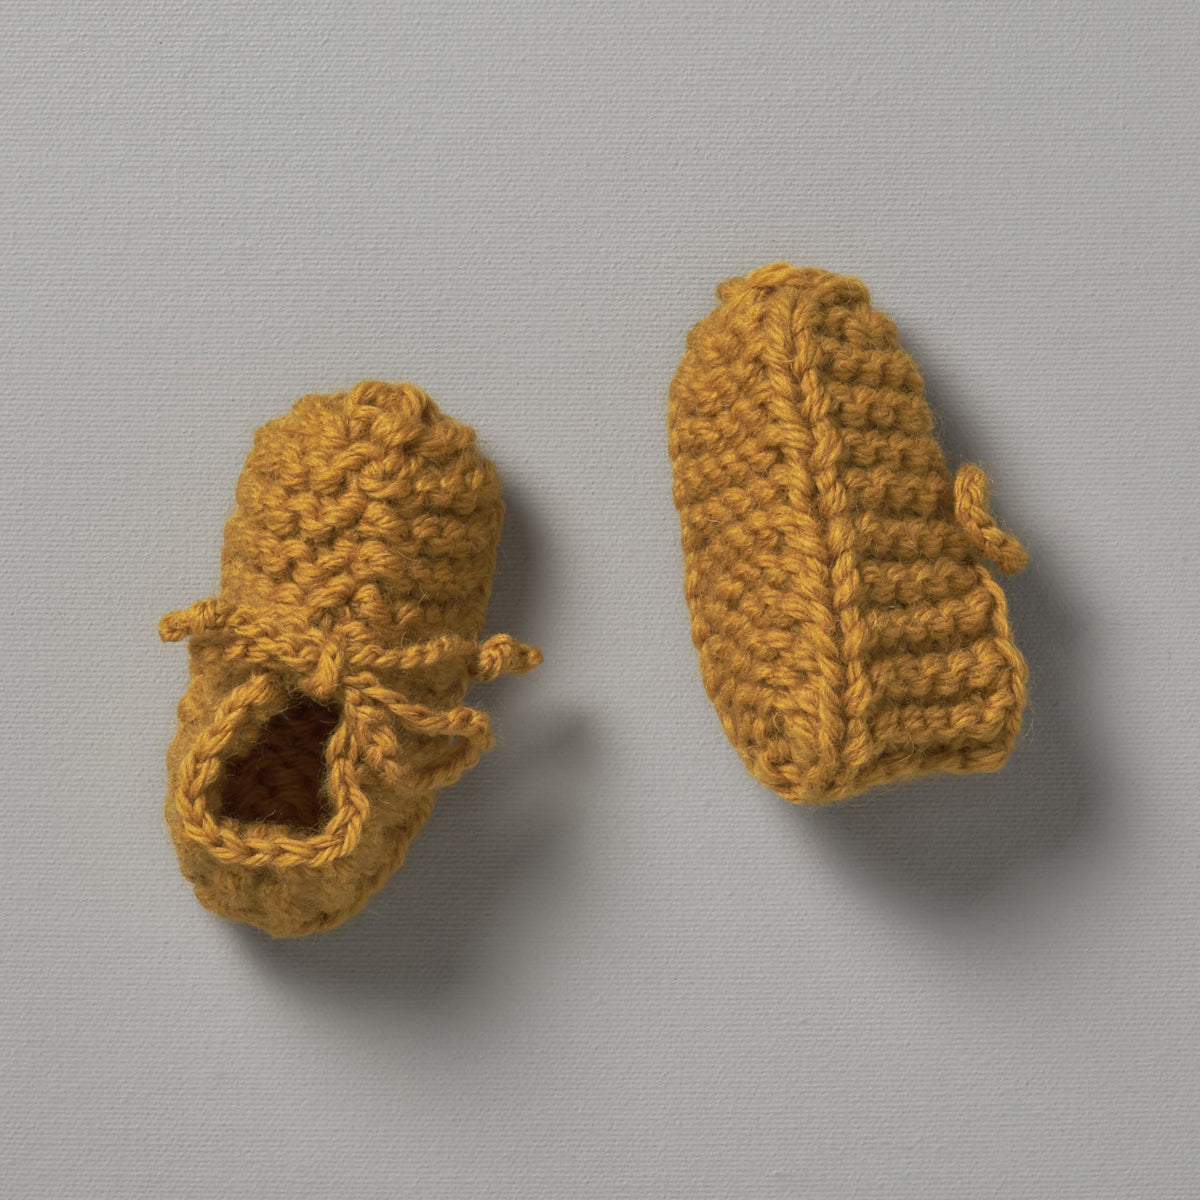 A pair of Weebits Hand Knitted Chunky Booties - Mustard on a grey surface.